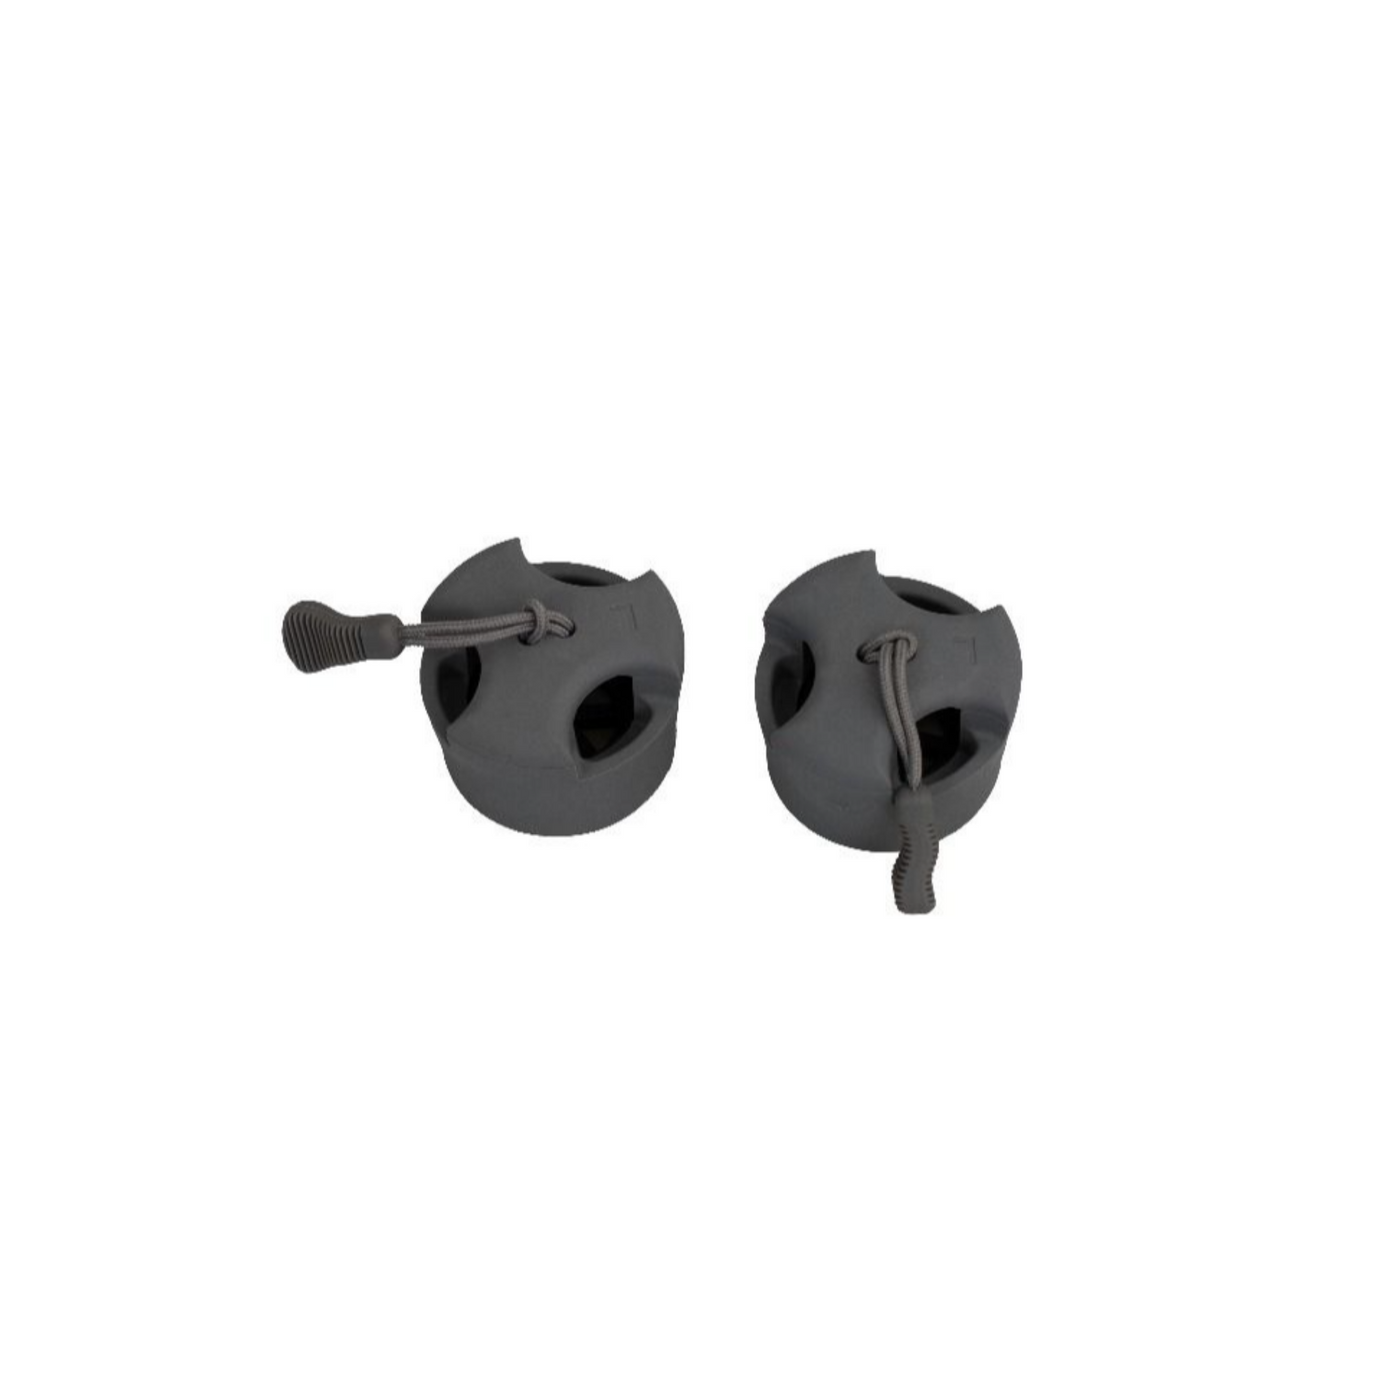 Pyranha Self Draining Scupper Plugs - Large | Kayak Accessories | Pyranha Factory Store | Further Faster Christchurch NZ